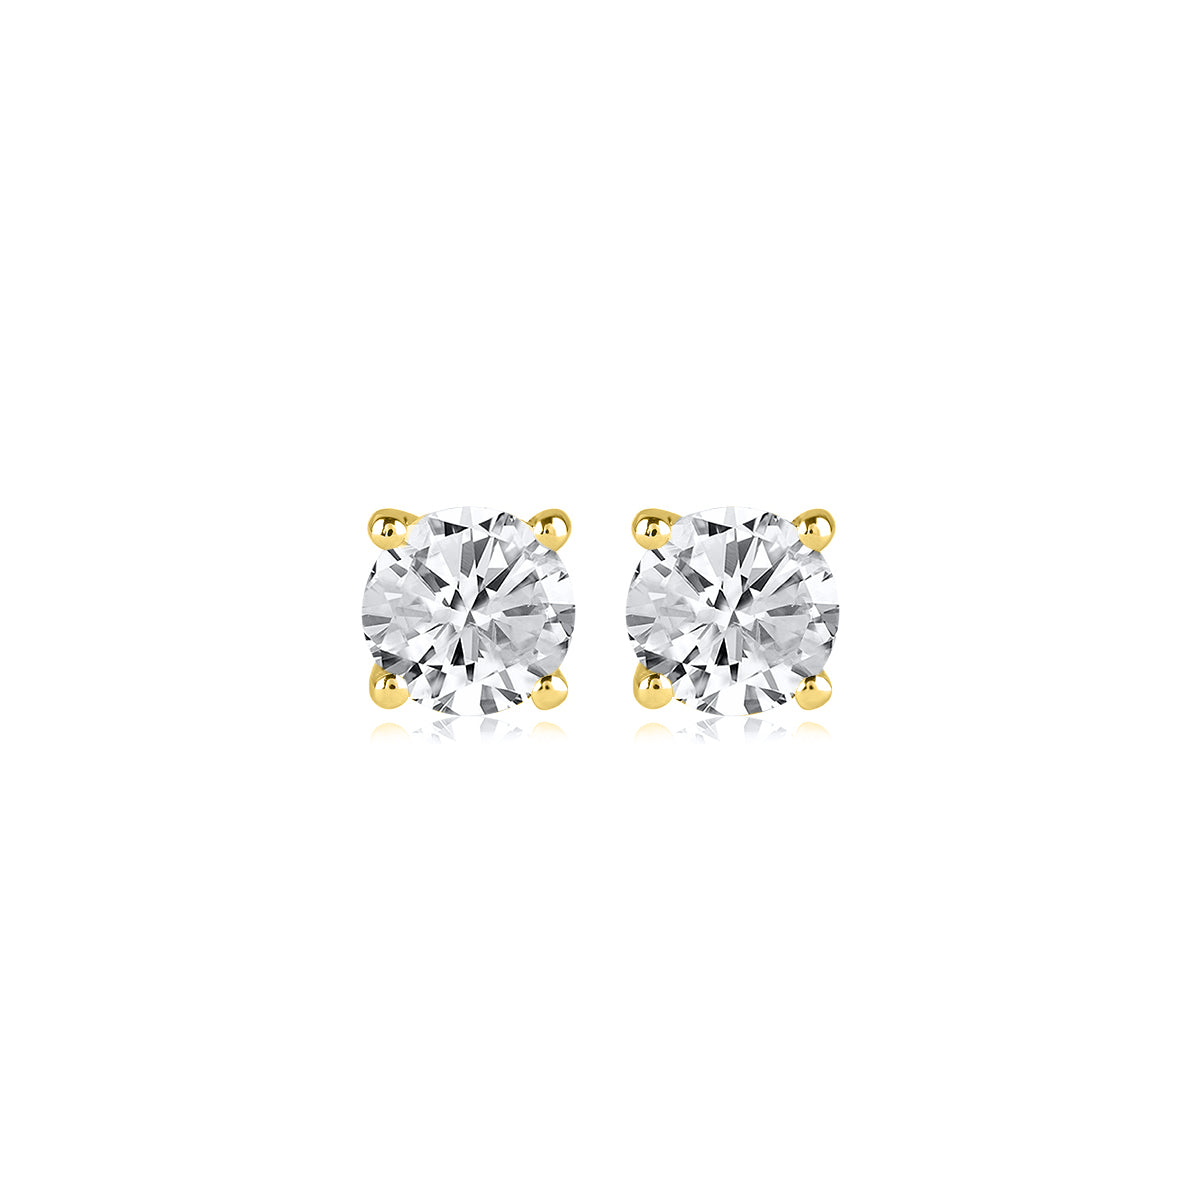 0.15 Carat Solitaire Stud Earrings with Friction Back in 14K Gold